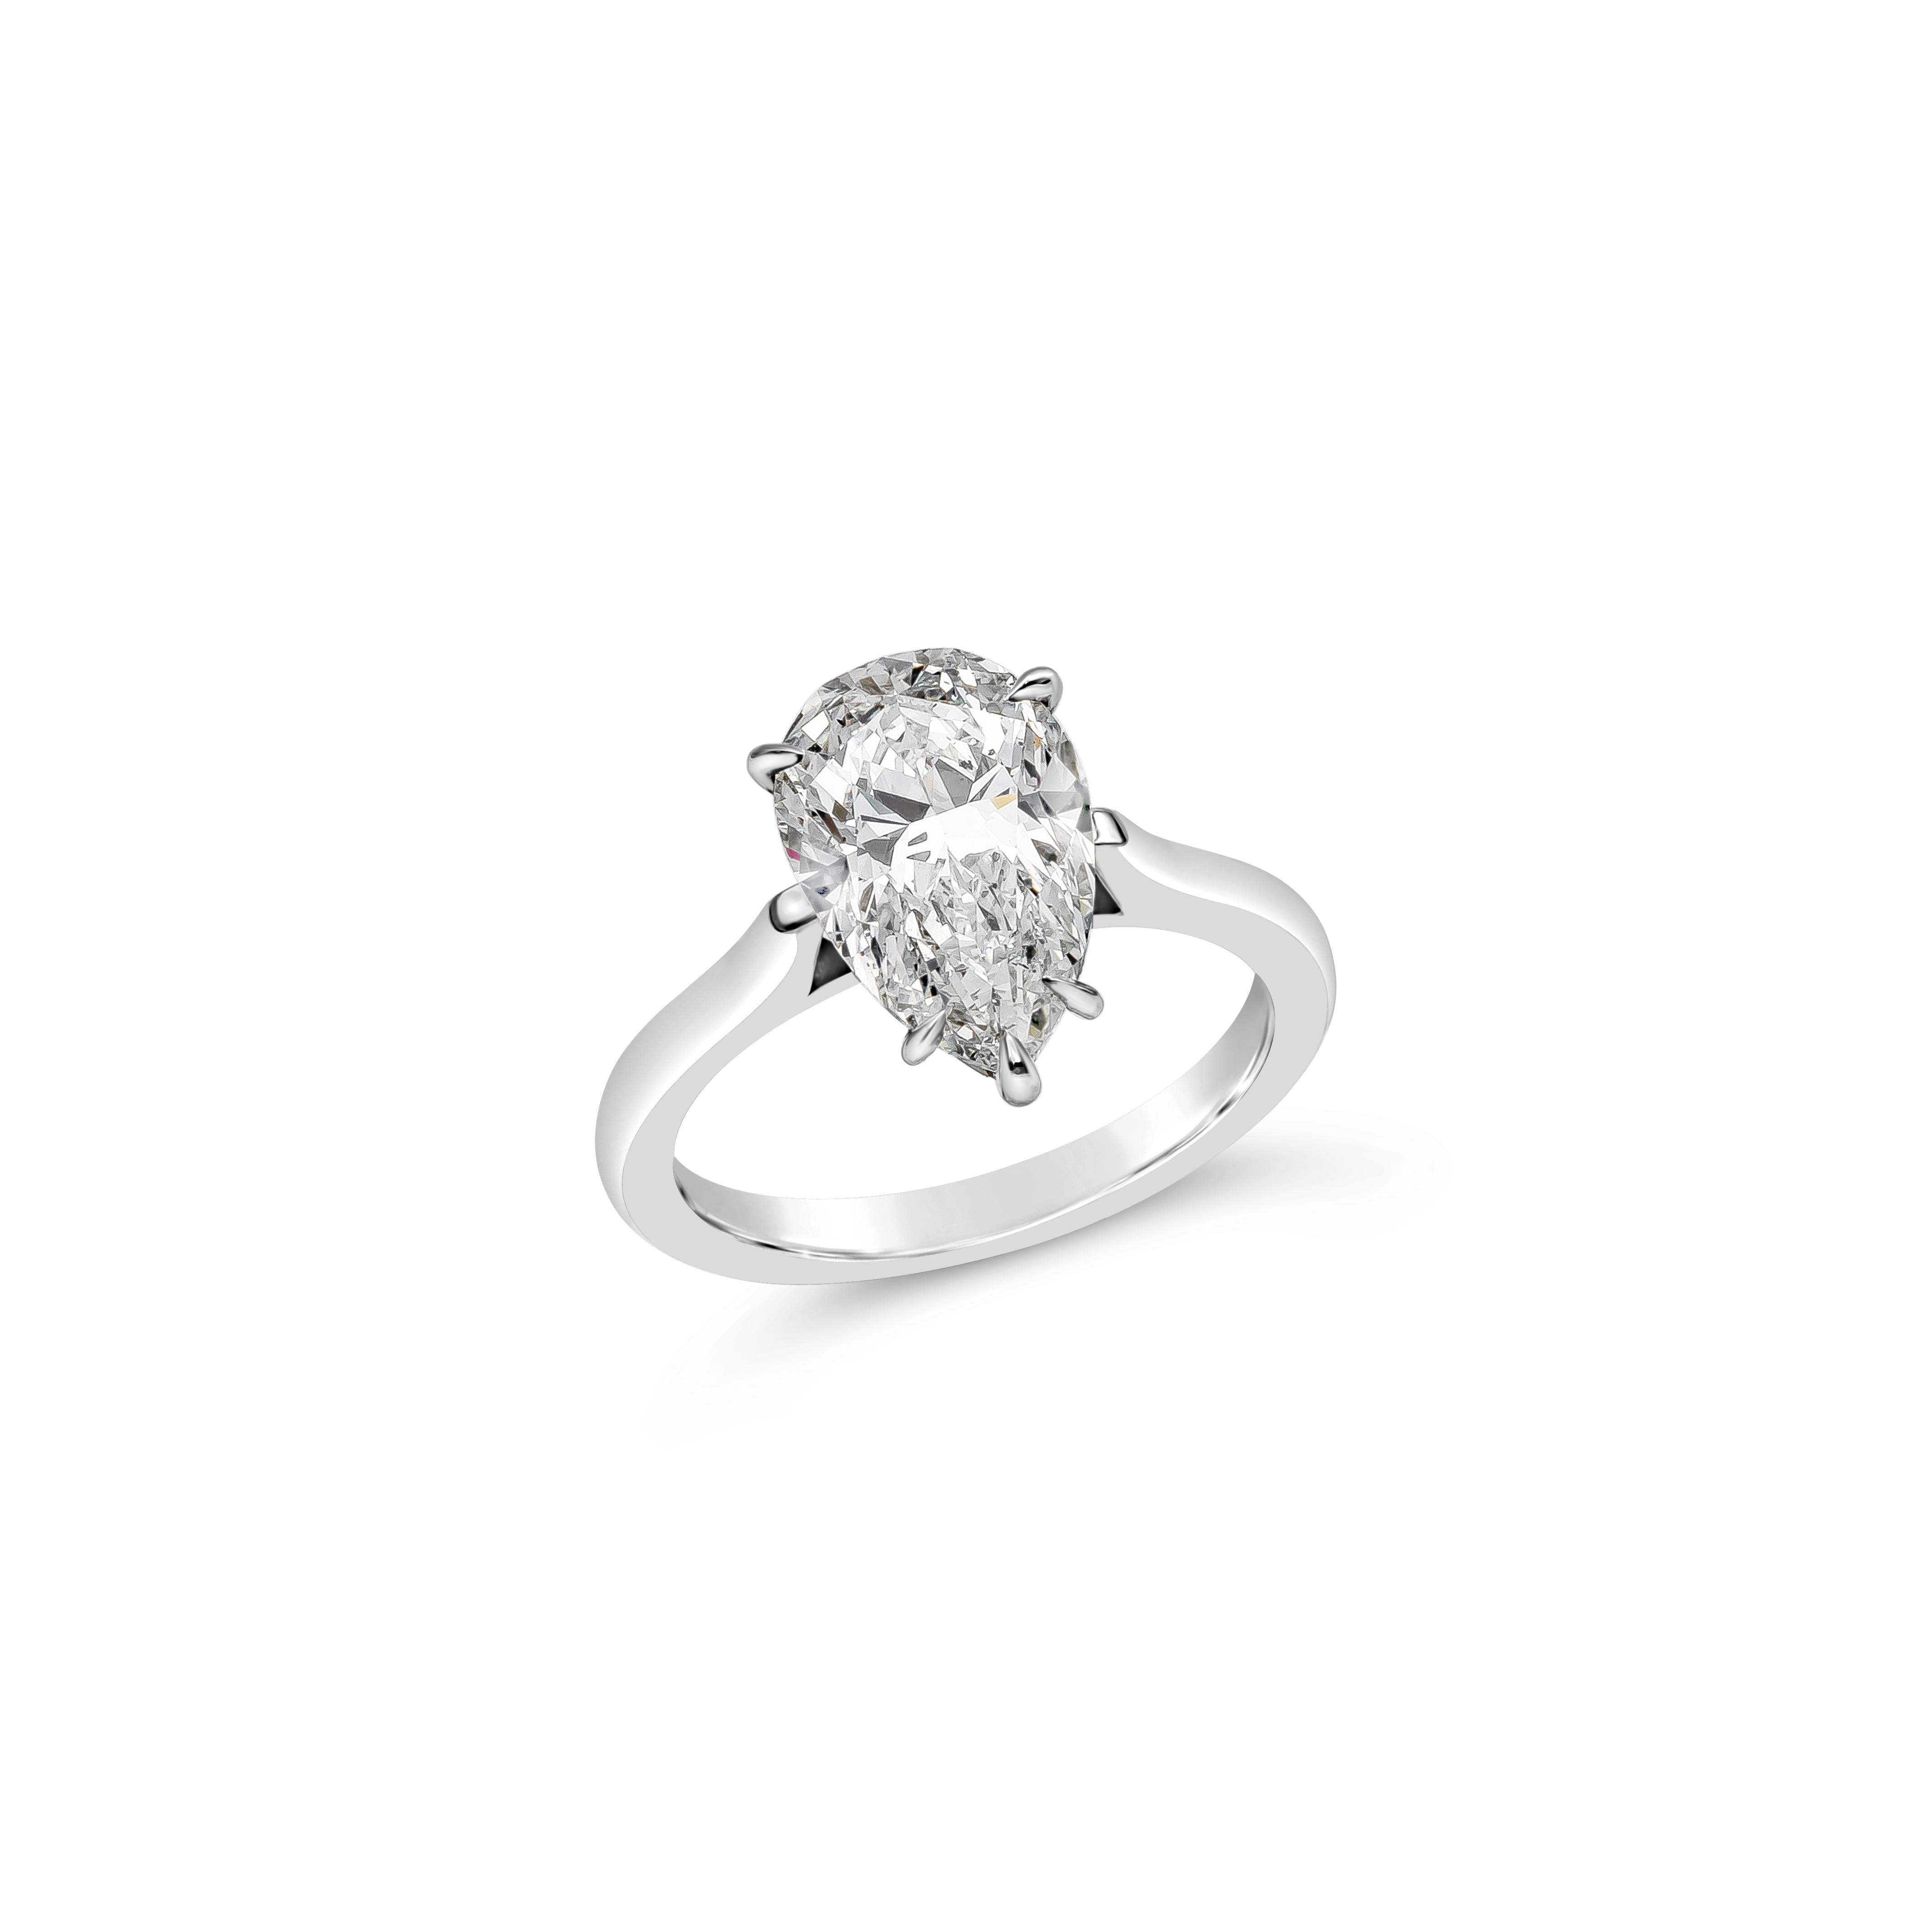 Contemporary GIA Certified 3.27 Carats Total Pear Shape Diamond Solitaire Engagement Ring